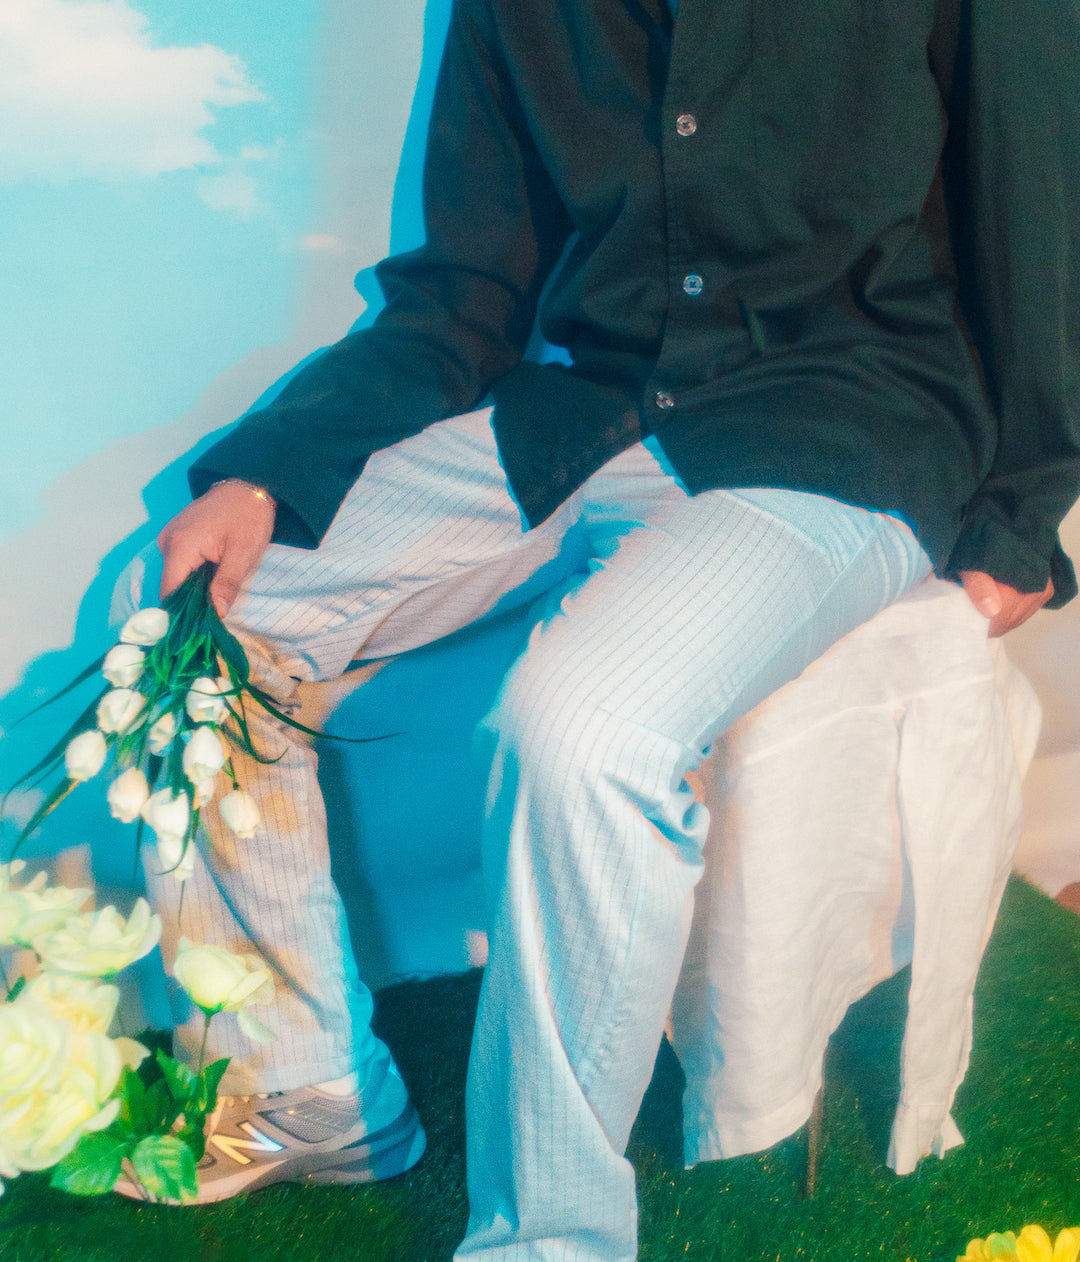 Boy sitting down wearing joujete striped pants, while holding a bouquet of tulips.